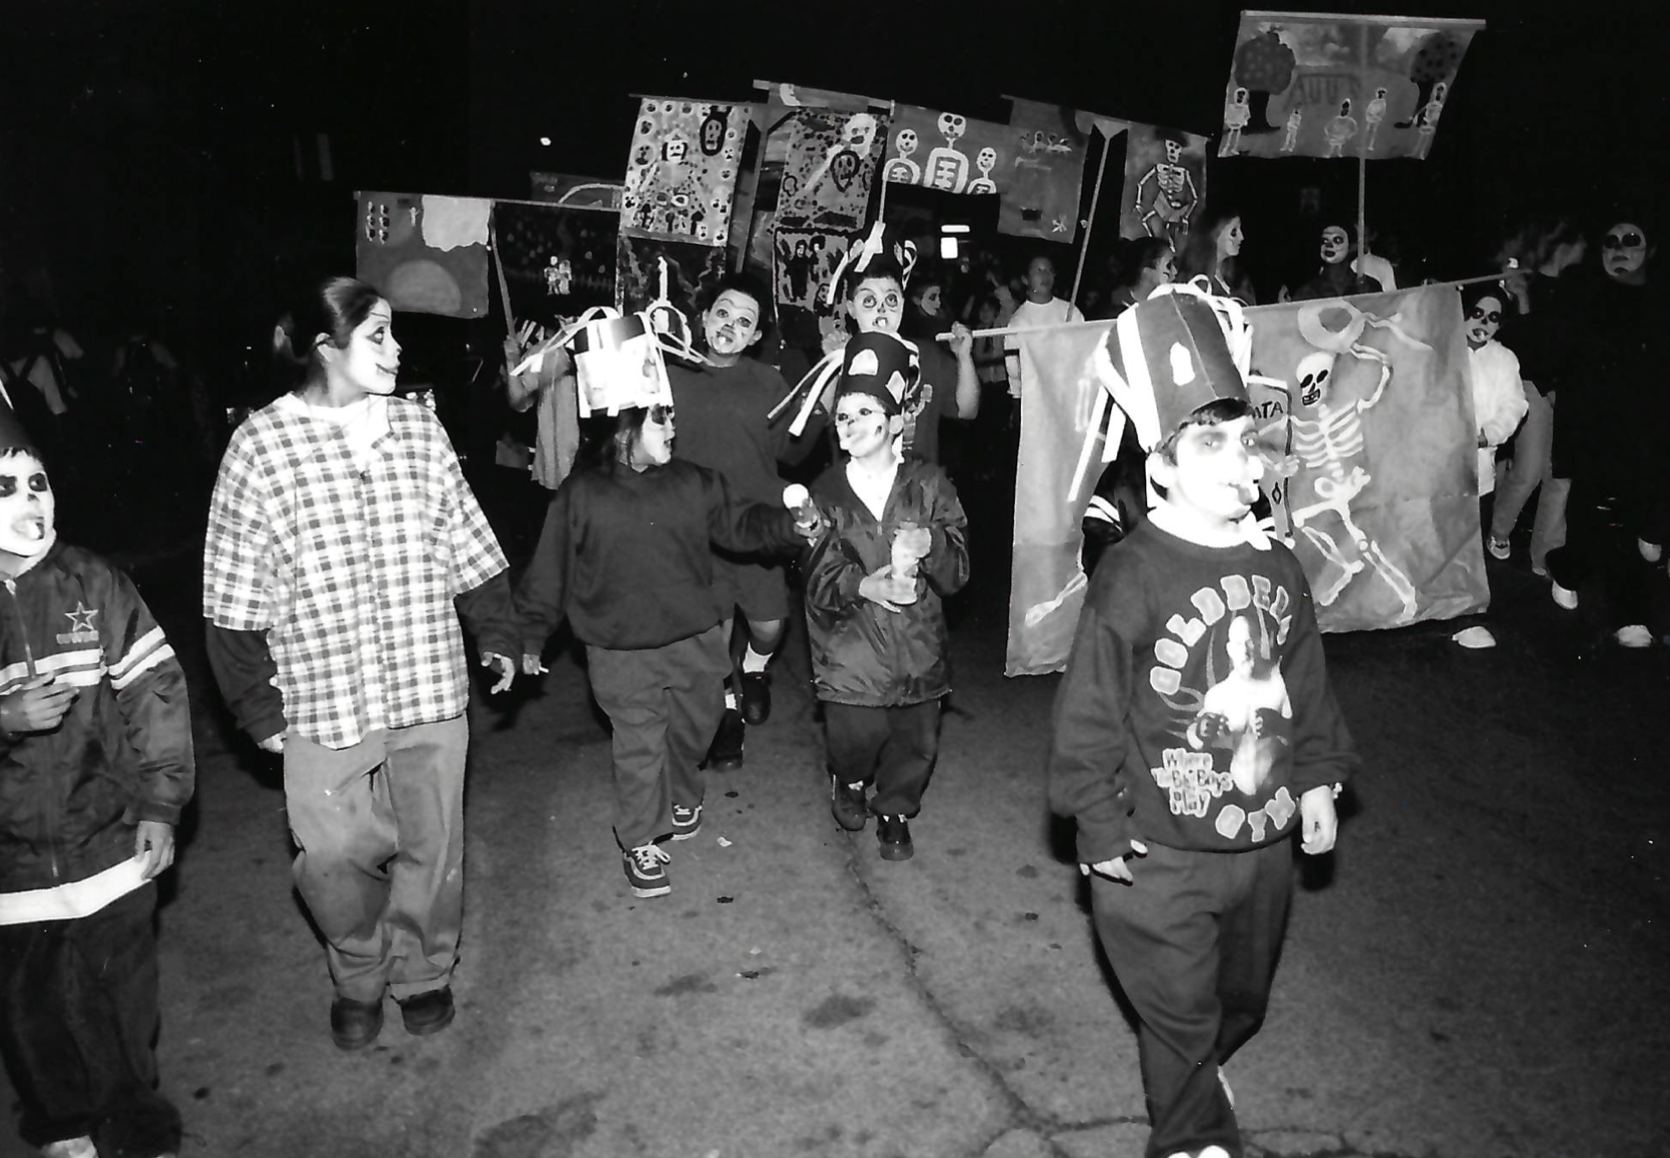 Children walking on a dark street wearing face paint and carrying signs and banners.